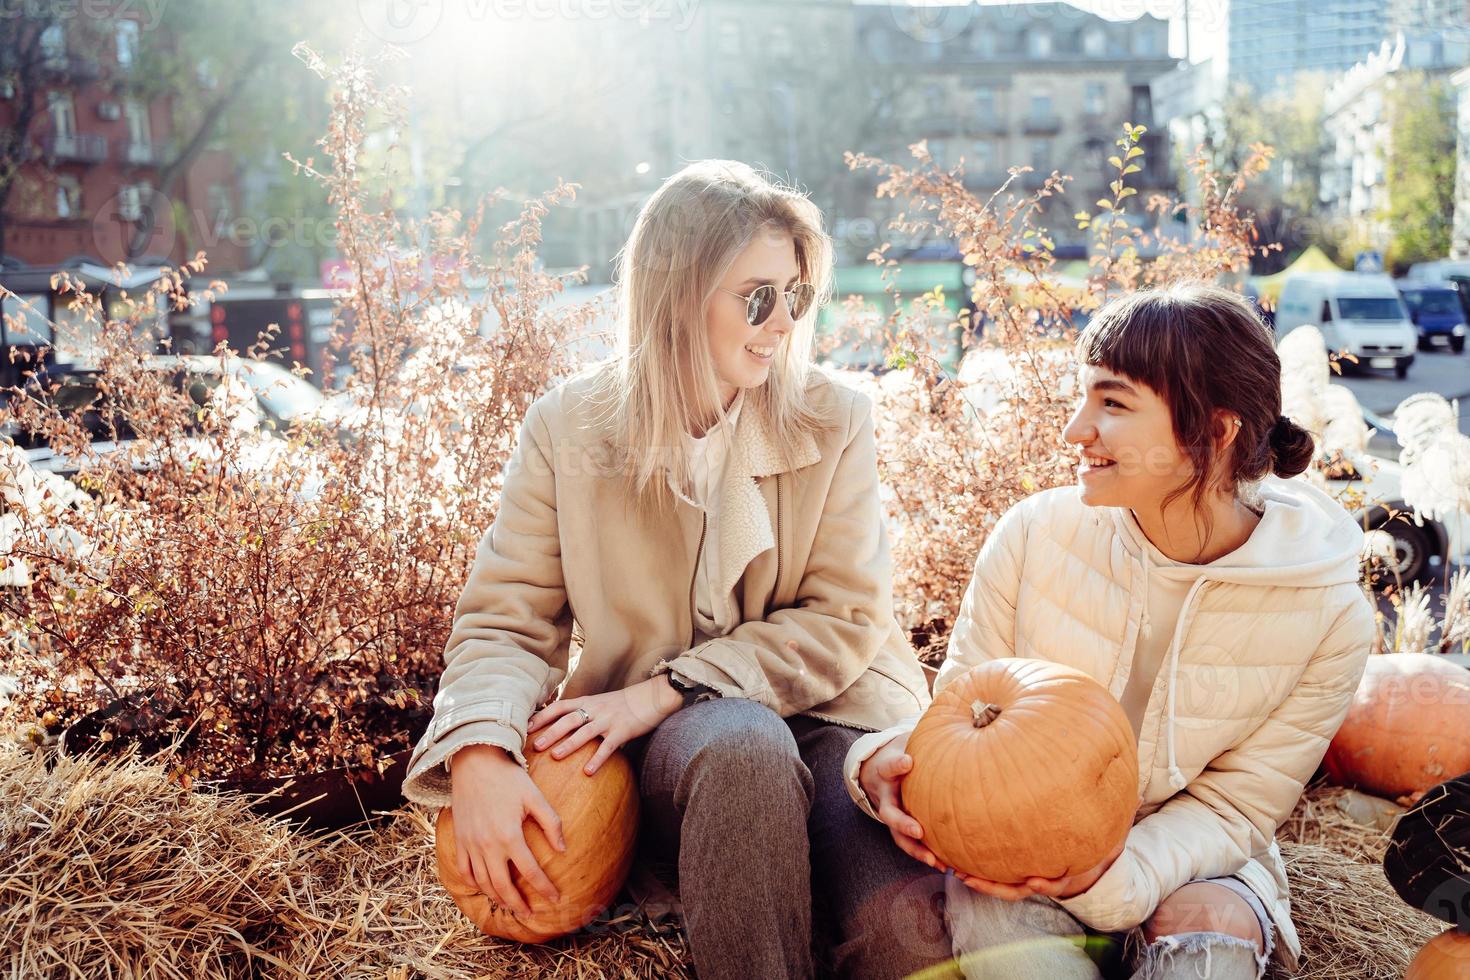 Girls holds pumpkins in hands on the background of the street. photo